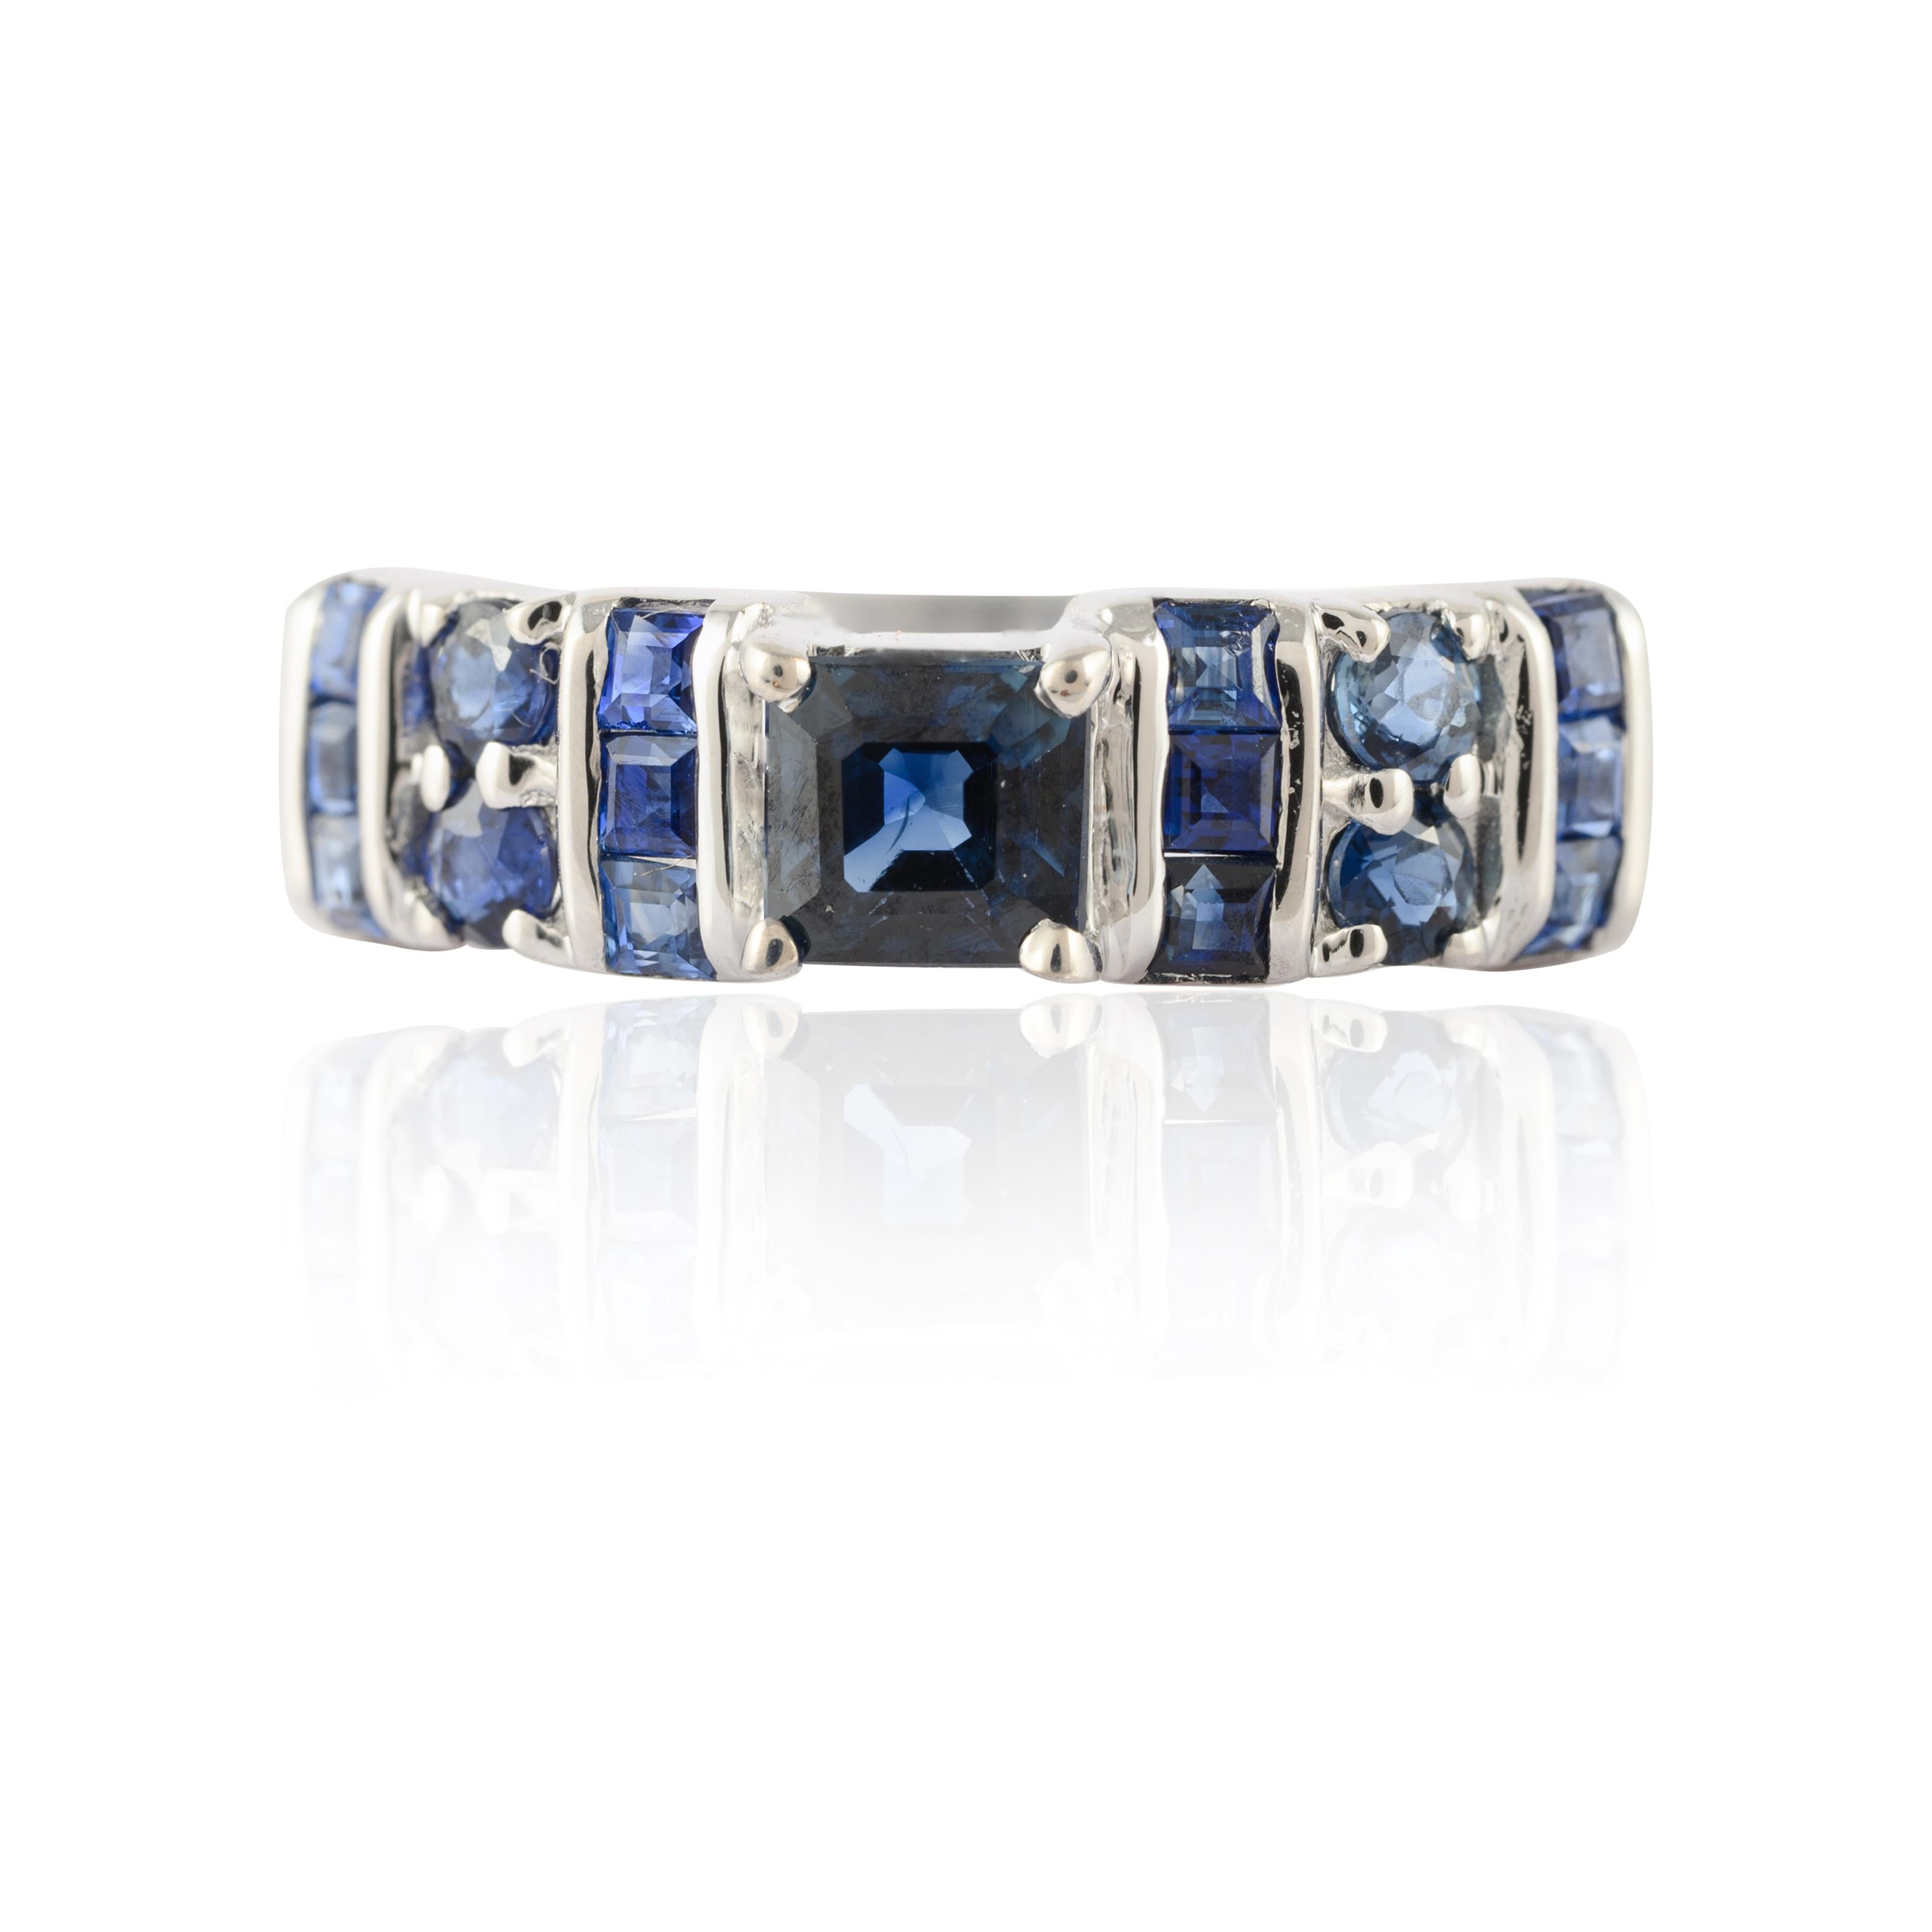 For Sale:  Natural Dark Blue Sapphire Ring Embedded in 14K Solid White Gold 3